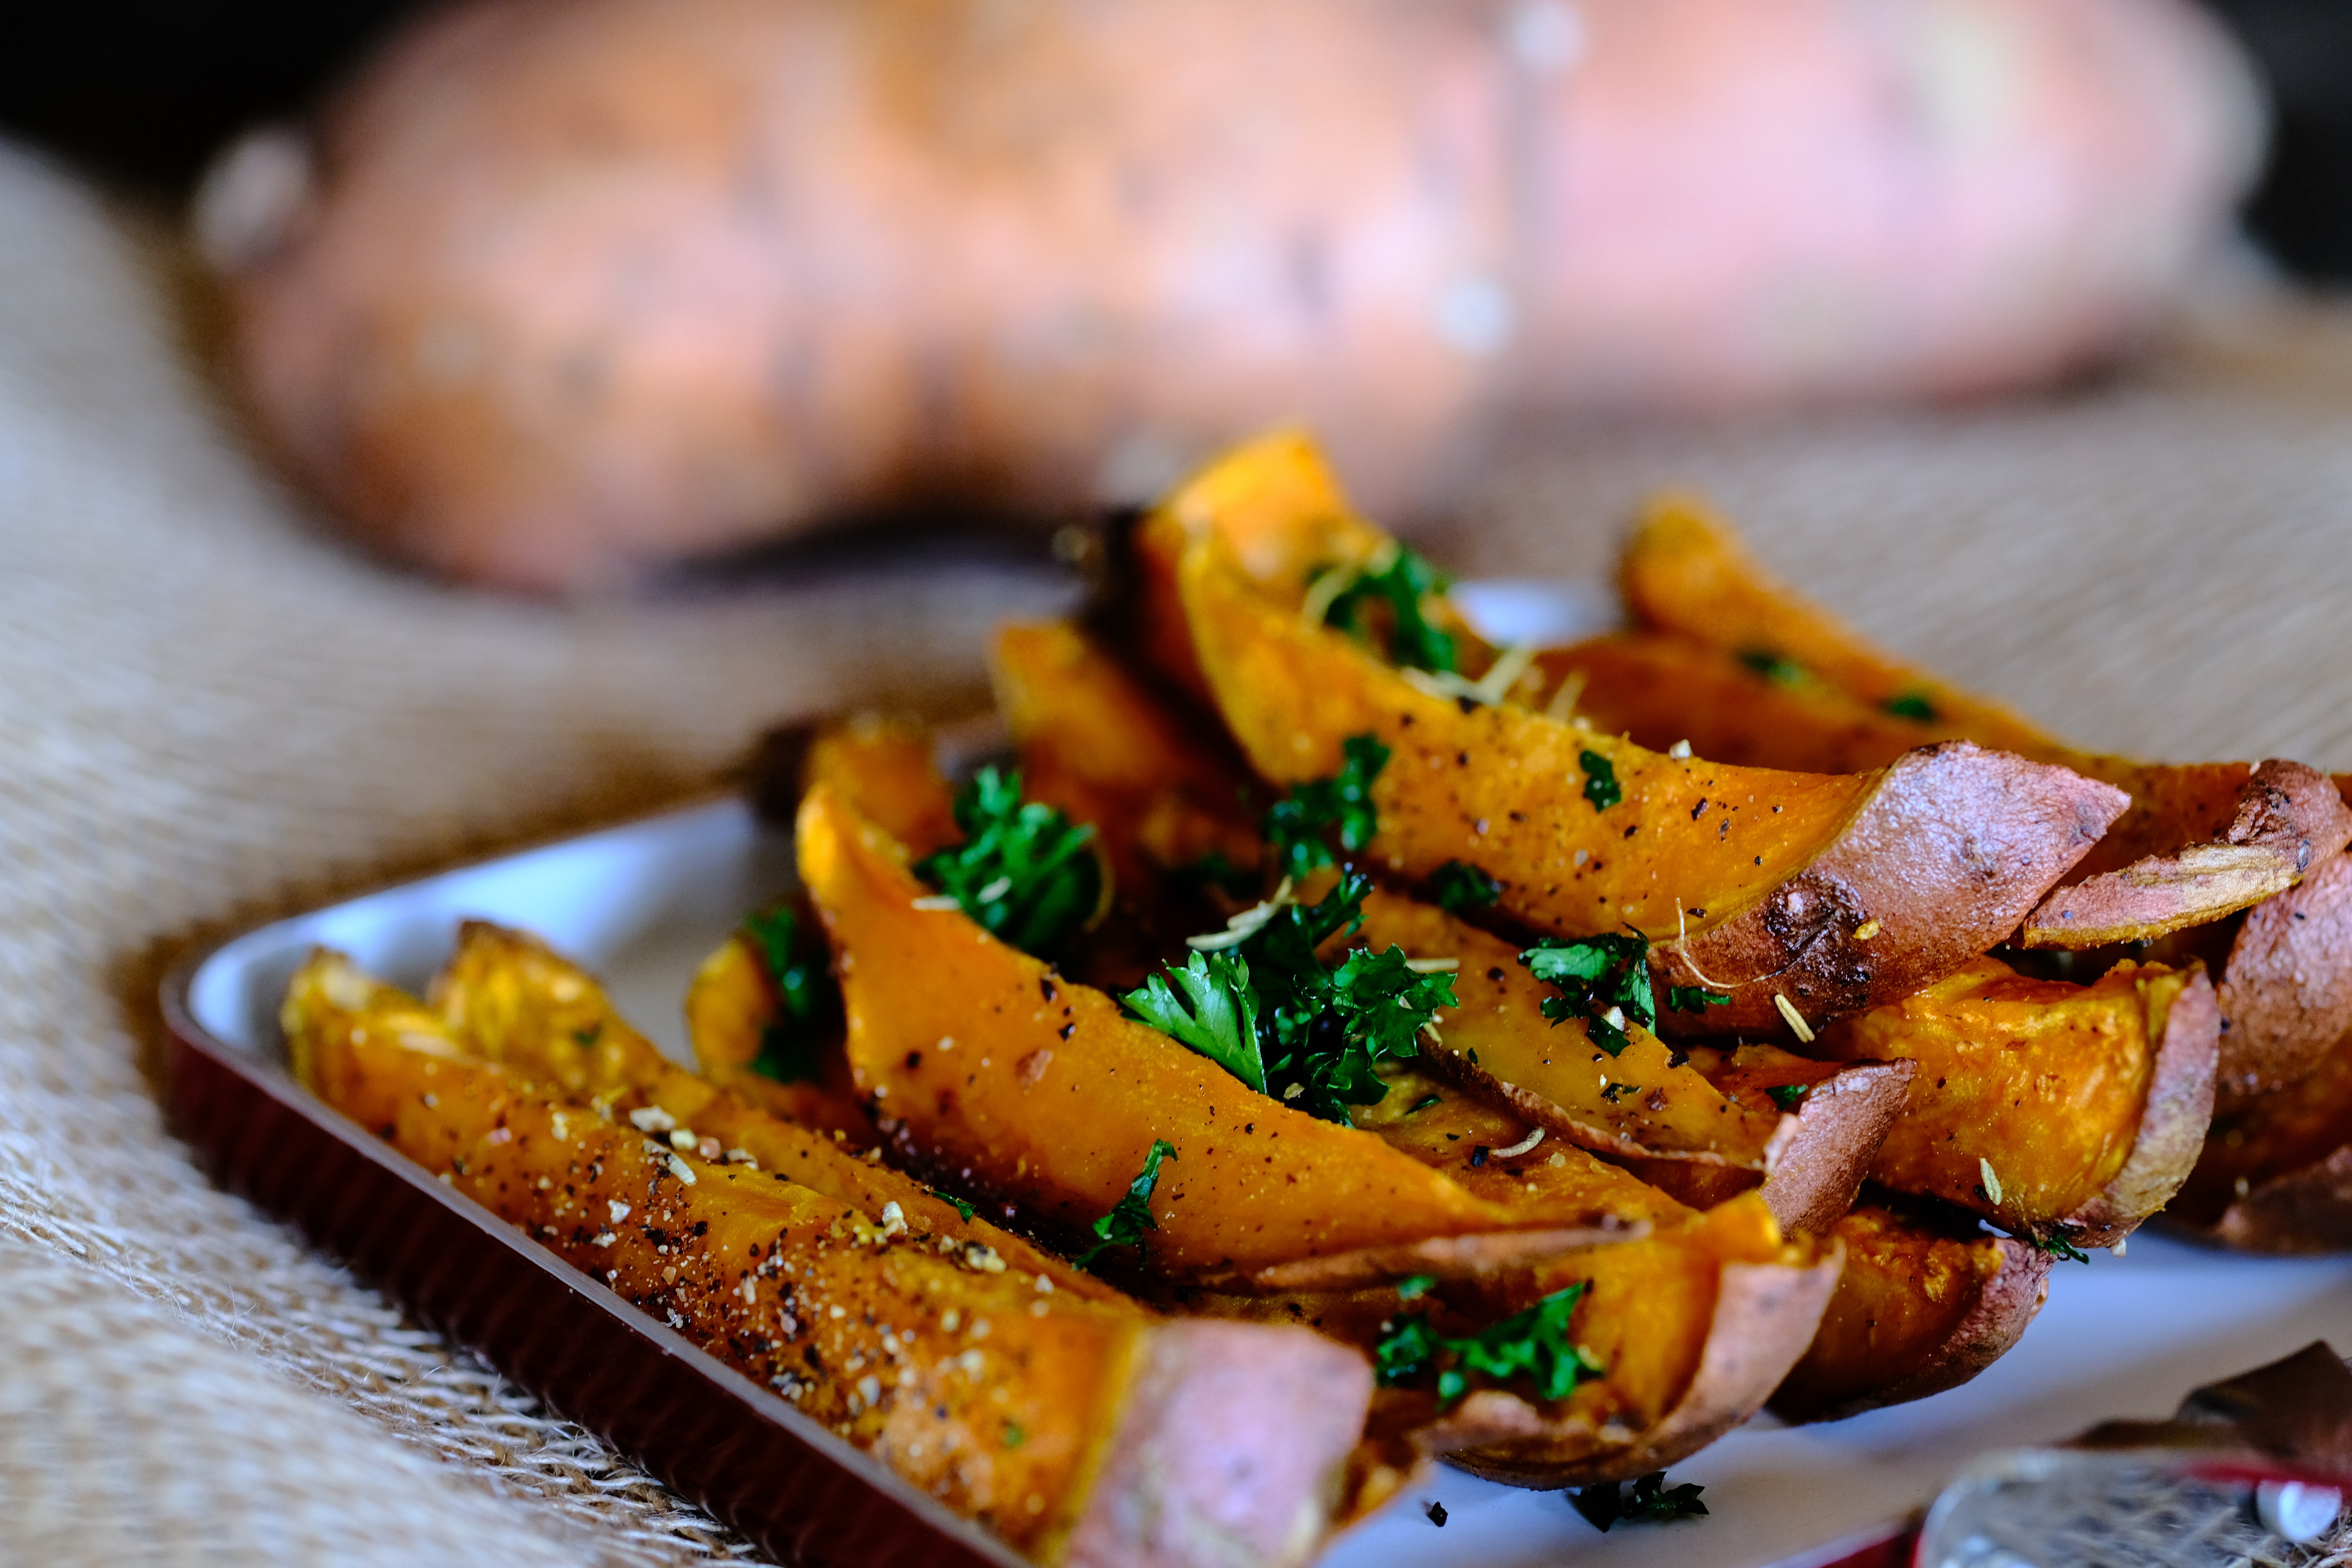 Sweet potato fries with parsley